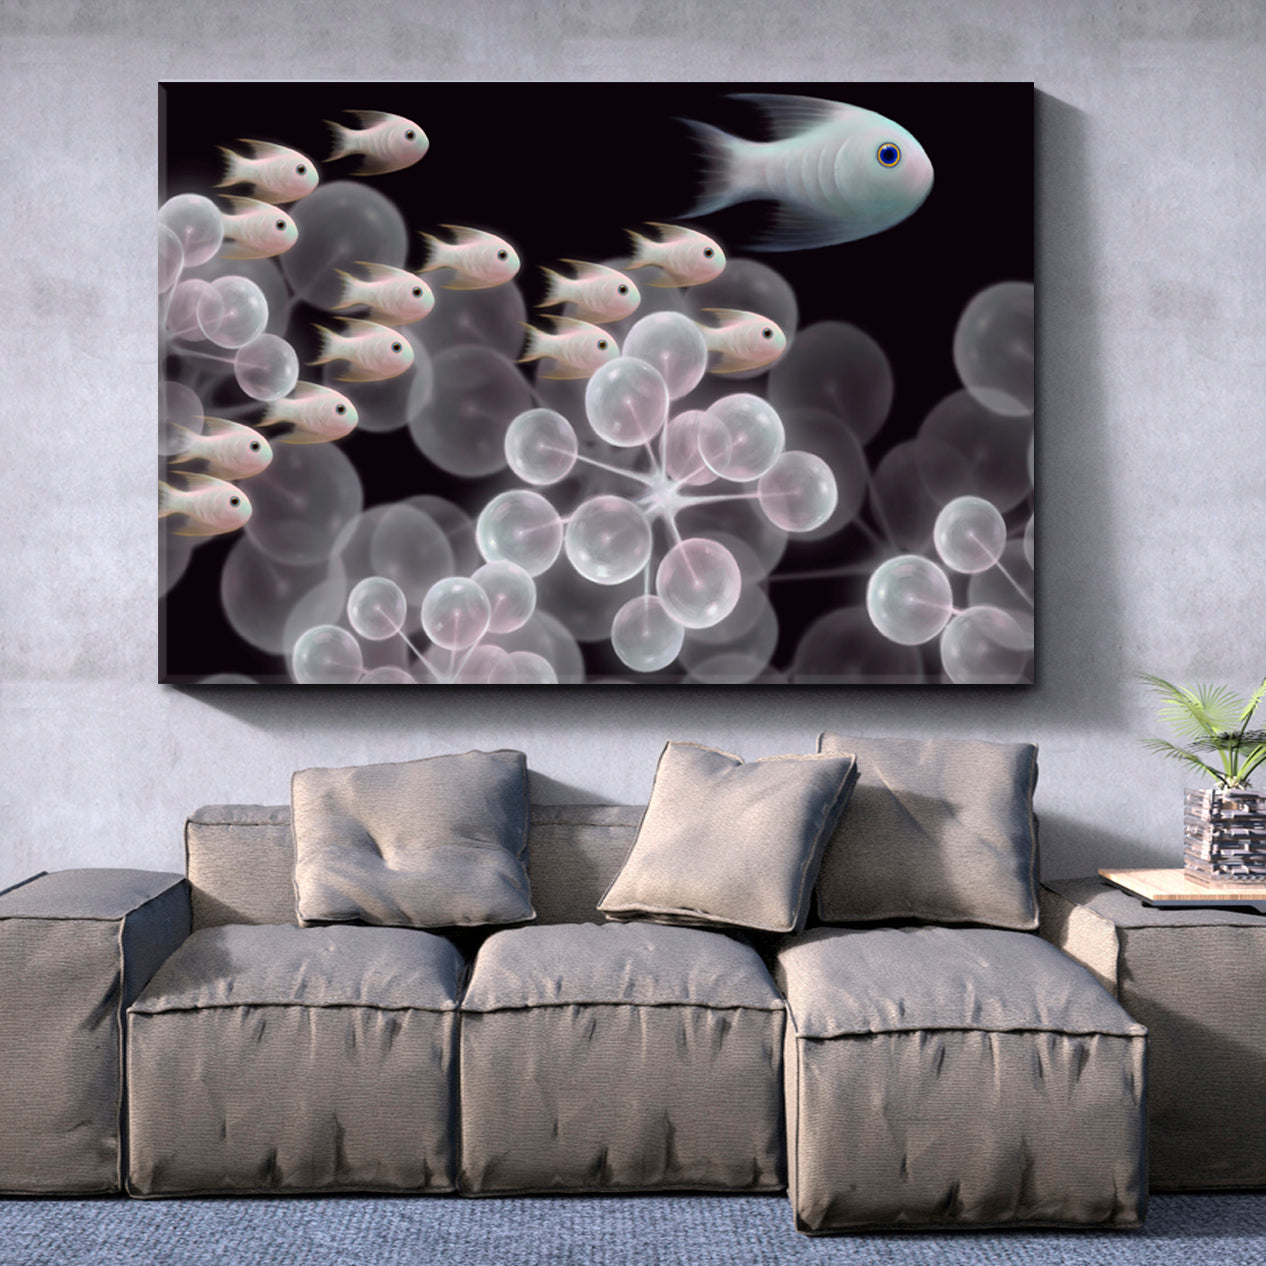 INNER UNIVERSE Live Organism Molecules And Schooling Fish Abstract Fantasy Nautical, Sea Life Pattern Art Artesty   